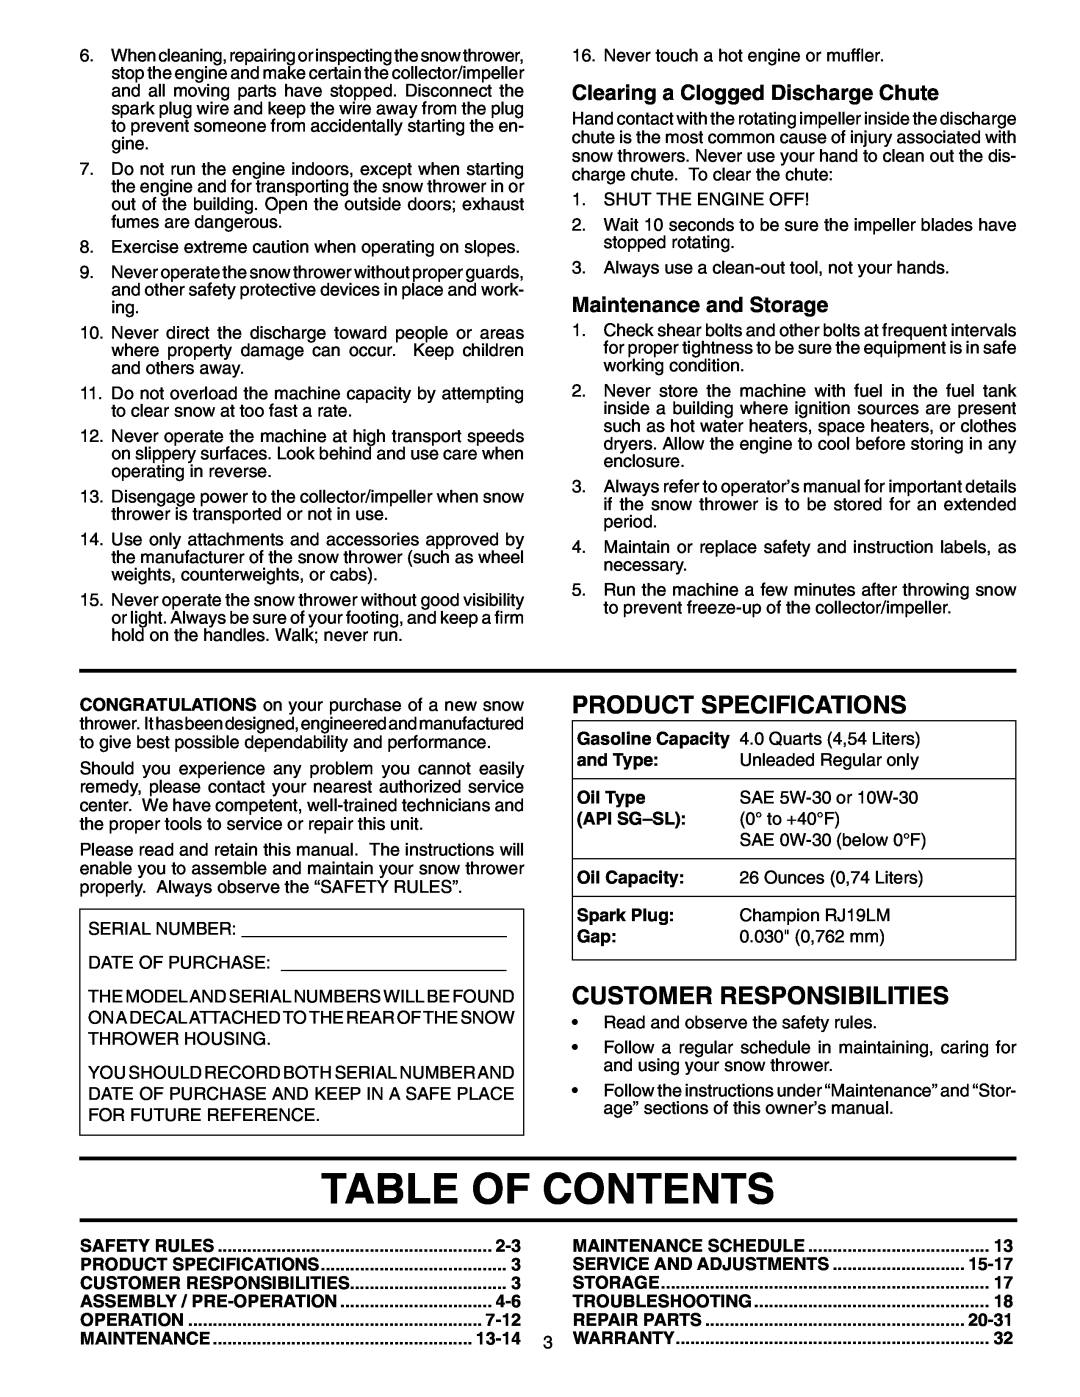 Poulan 199375 Table Of Contents, Clearing a Clogged Discharge Chute, Maintenance and Storage, Product Specifications, 7-12 